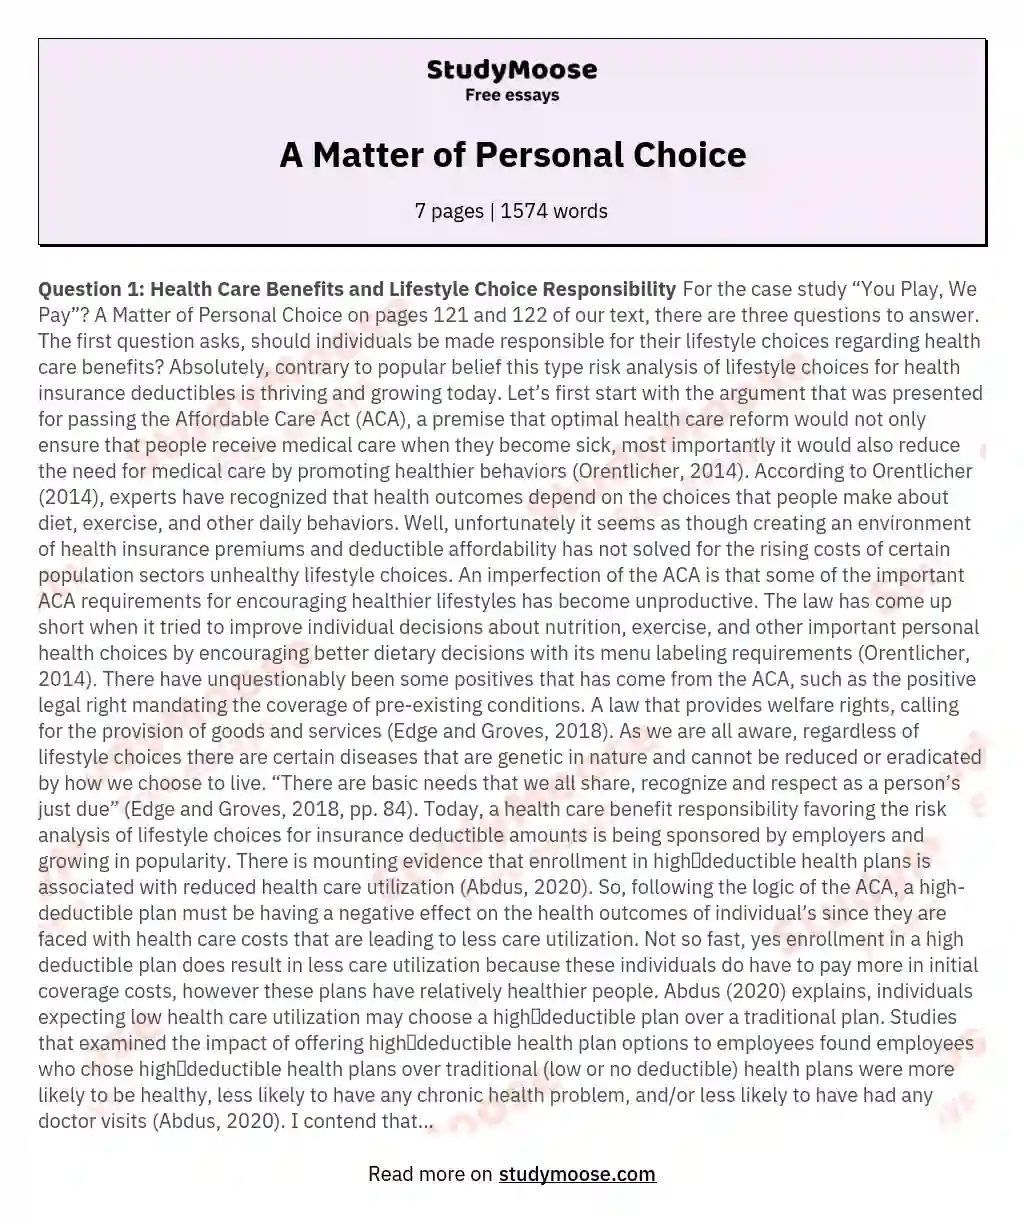 A Matter of Personal Choice essay